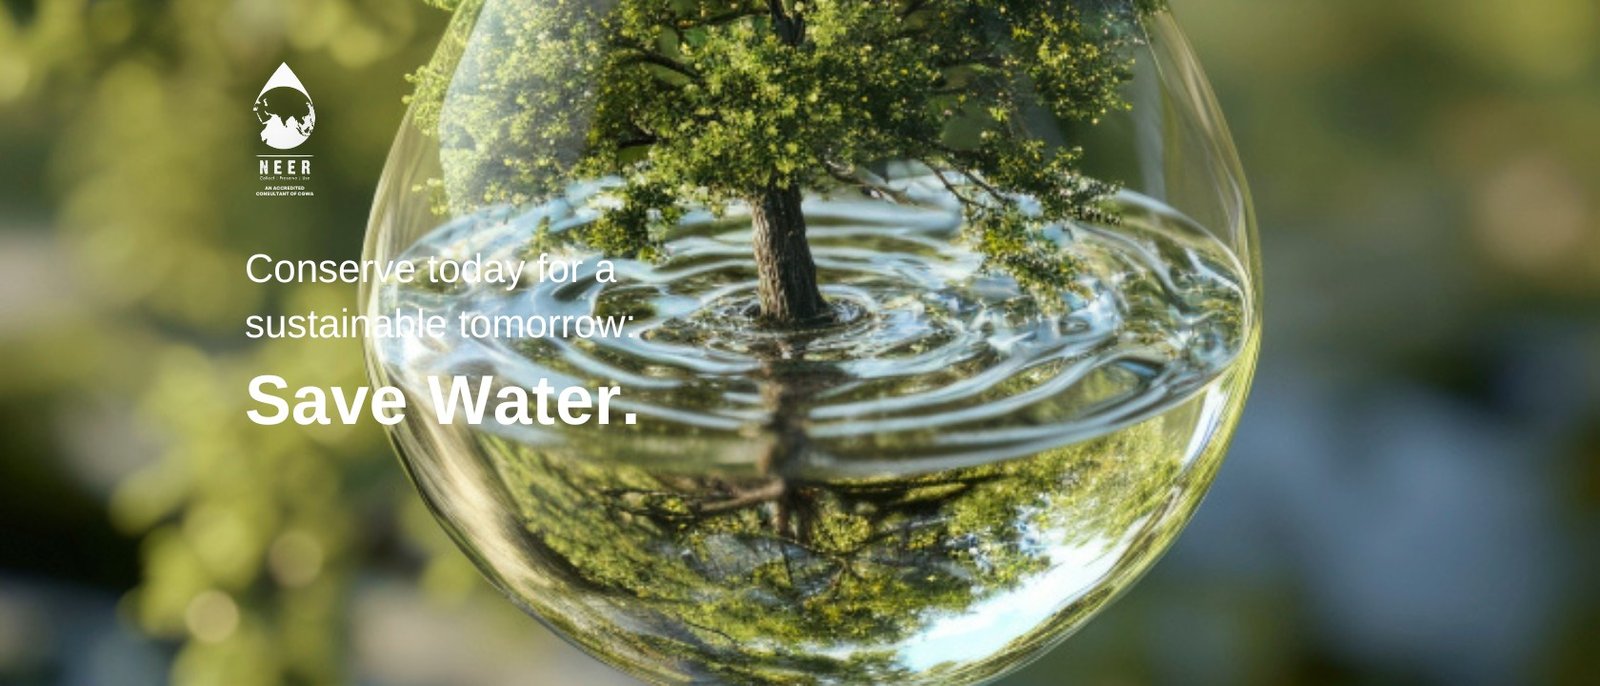 NEER-Conserve today for a sustainable tomorrow Save Water